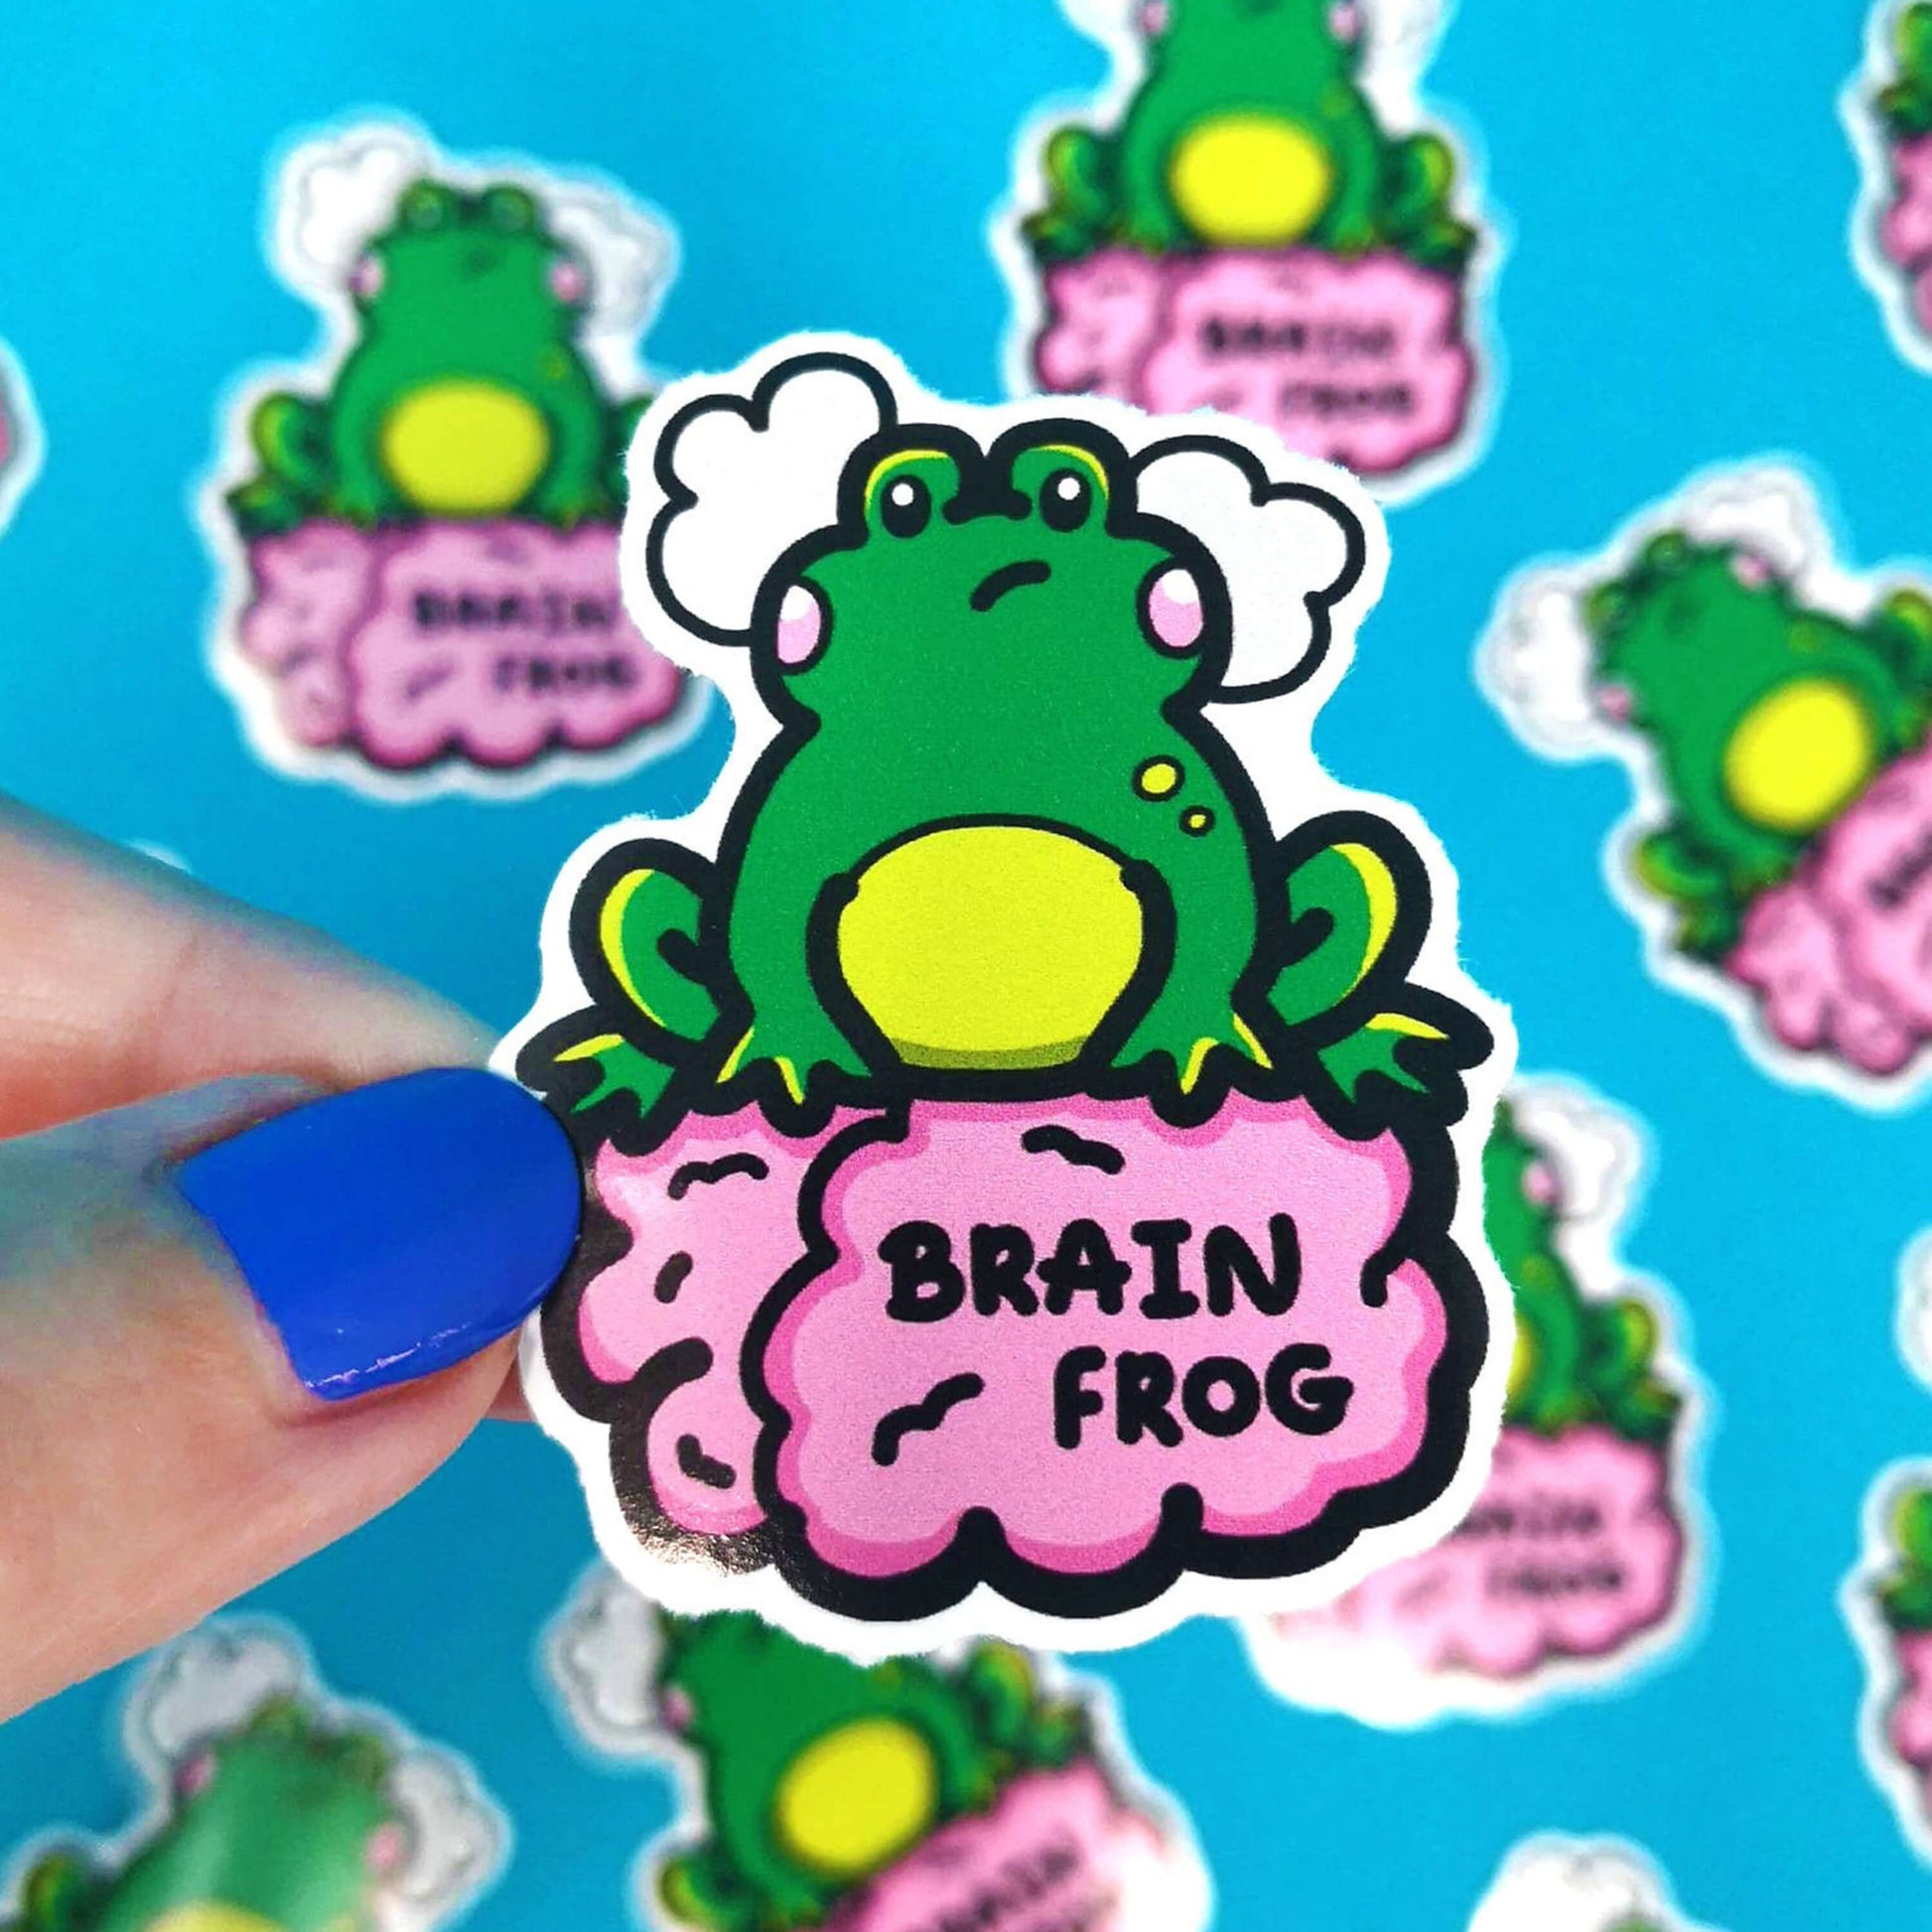 The Brain Frog Sticker - Brain Fog being held above multiple frog stickers by a hand with blue nail varnish over a blue background. The sticker is a confused frog with pink blush cheeks and two grey clouds above its head. Its sat on a pink brain with text that reads Brain Frog. The design was created to raise awareness for brain fog.